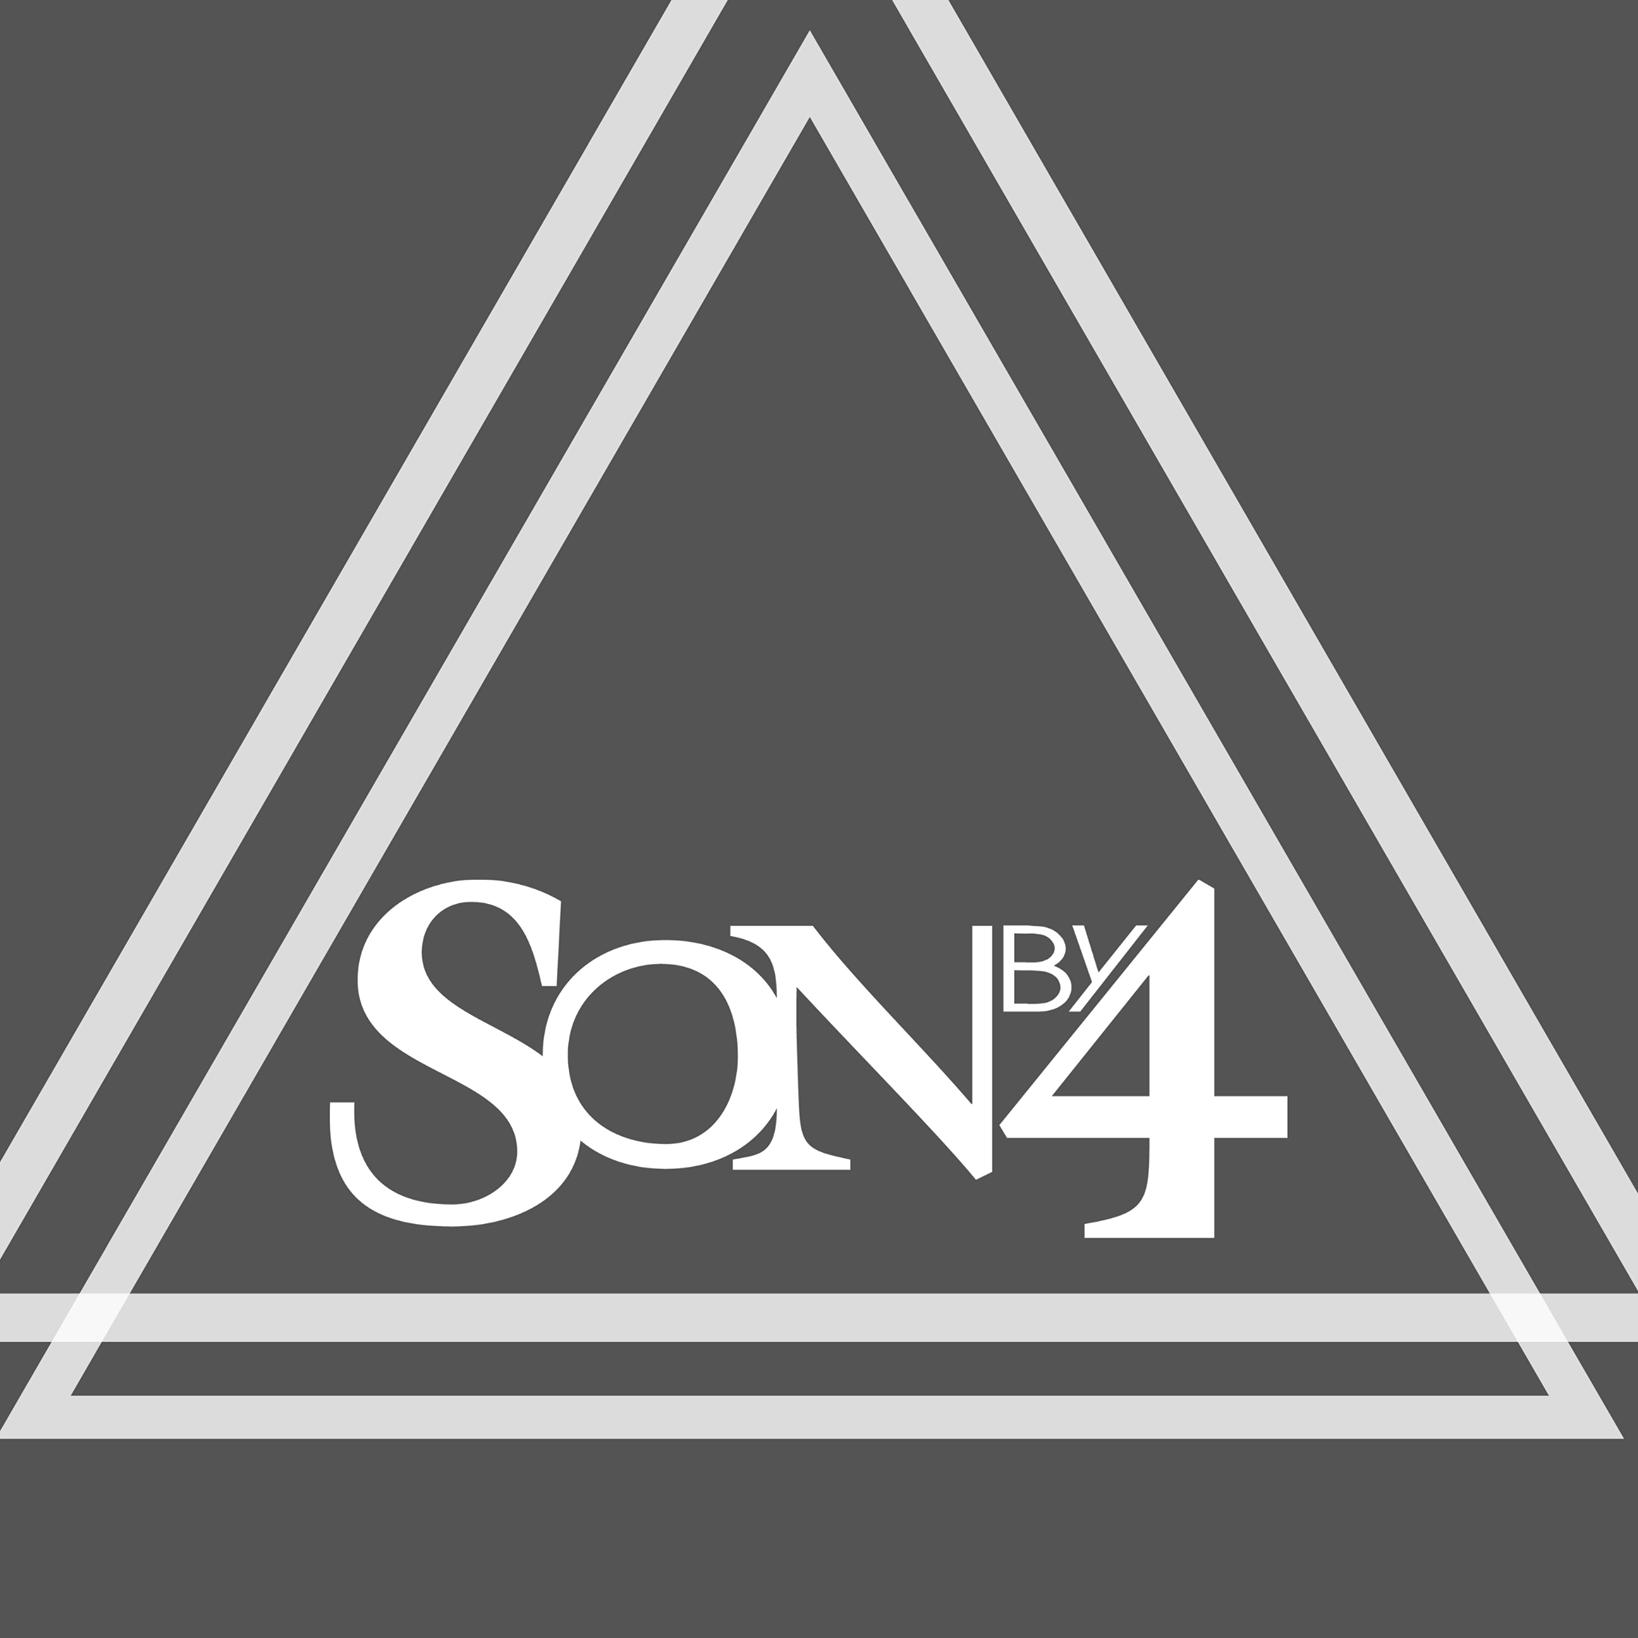 Son By Four